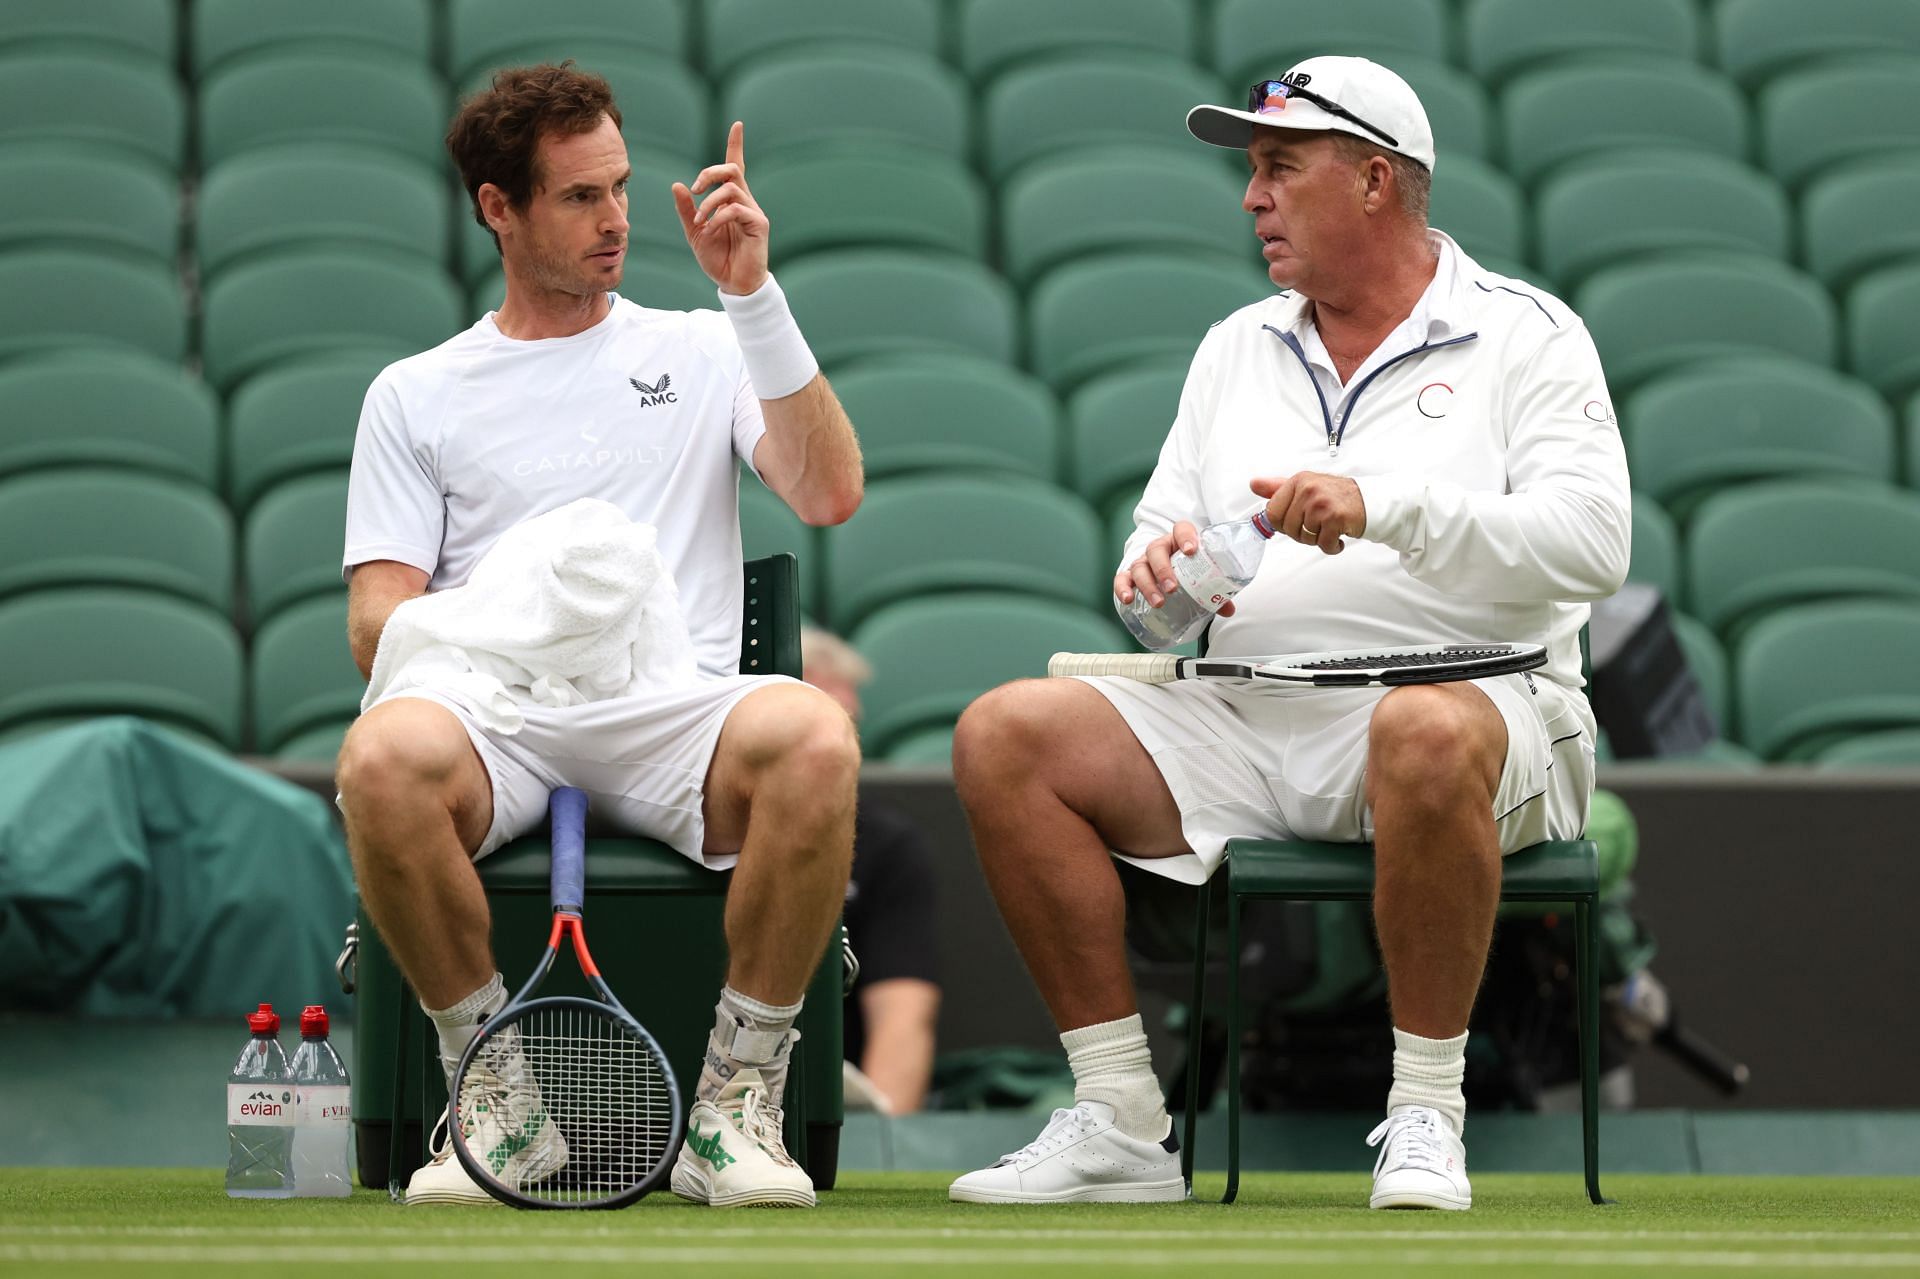 Andy Murray and Ivan Lendl during a training session ahead of The Championships - Wimbledon 2022.